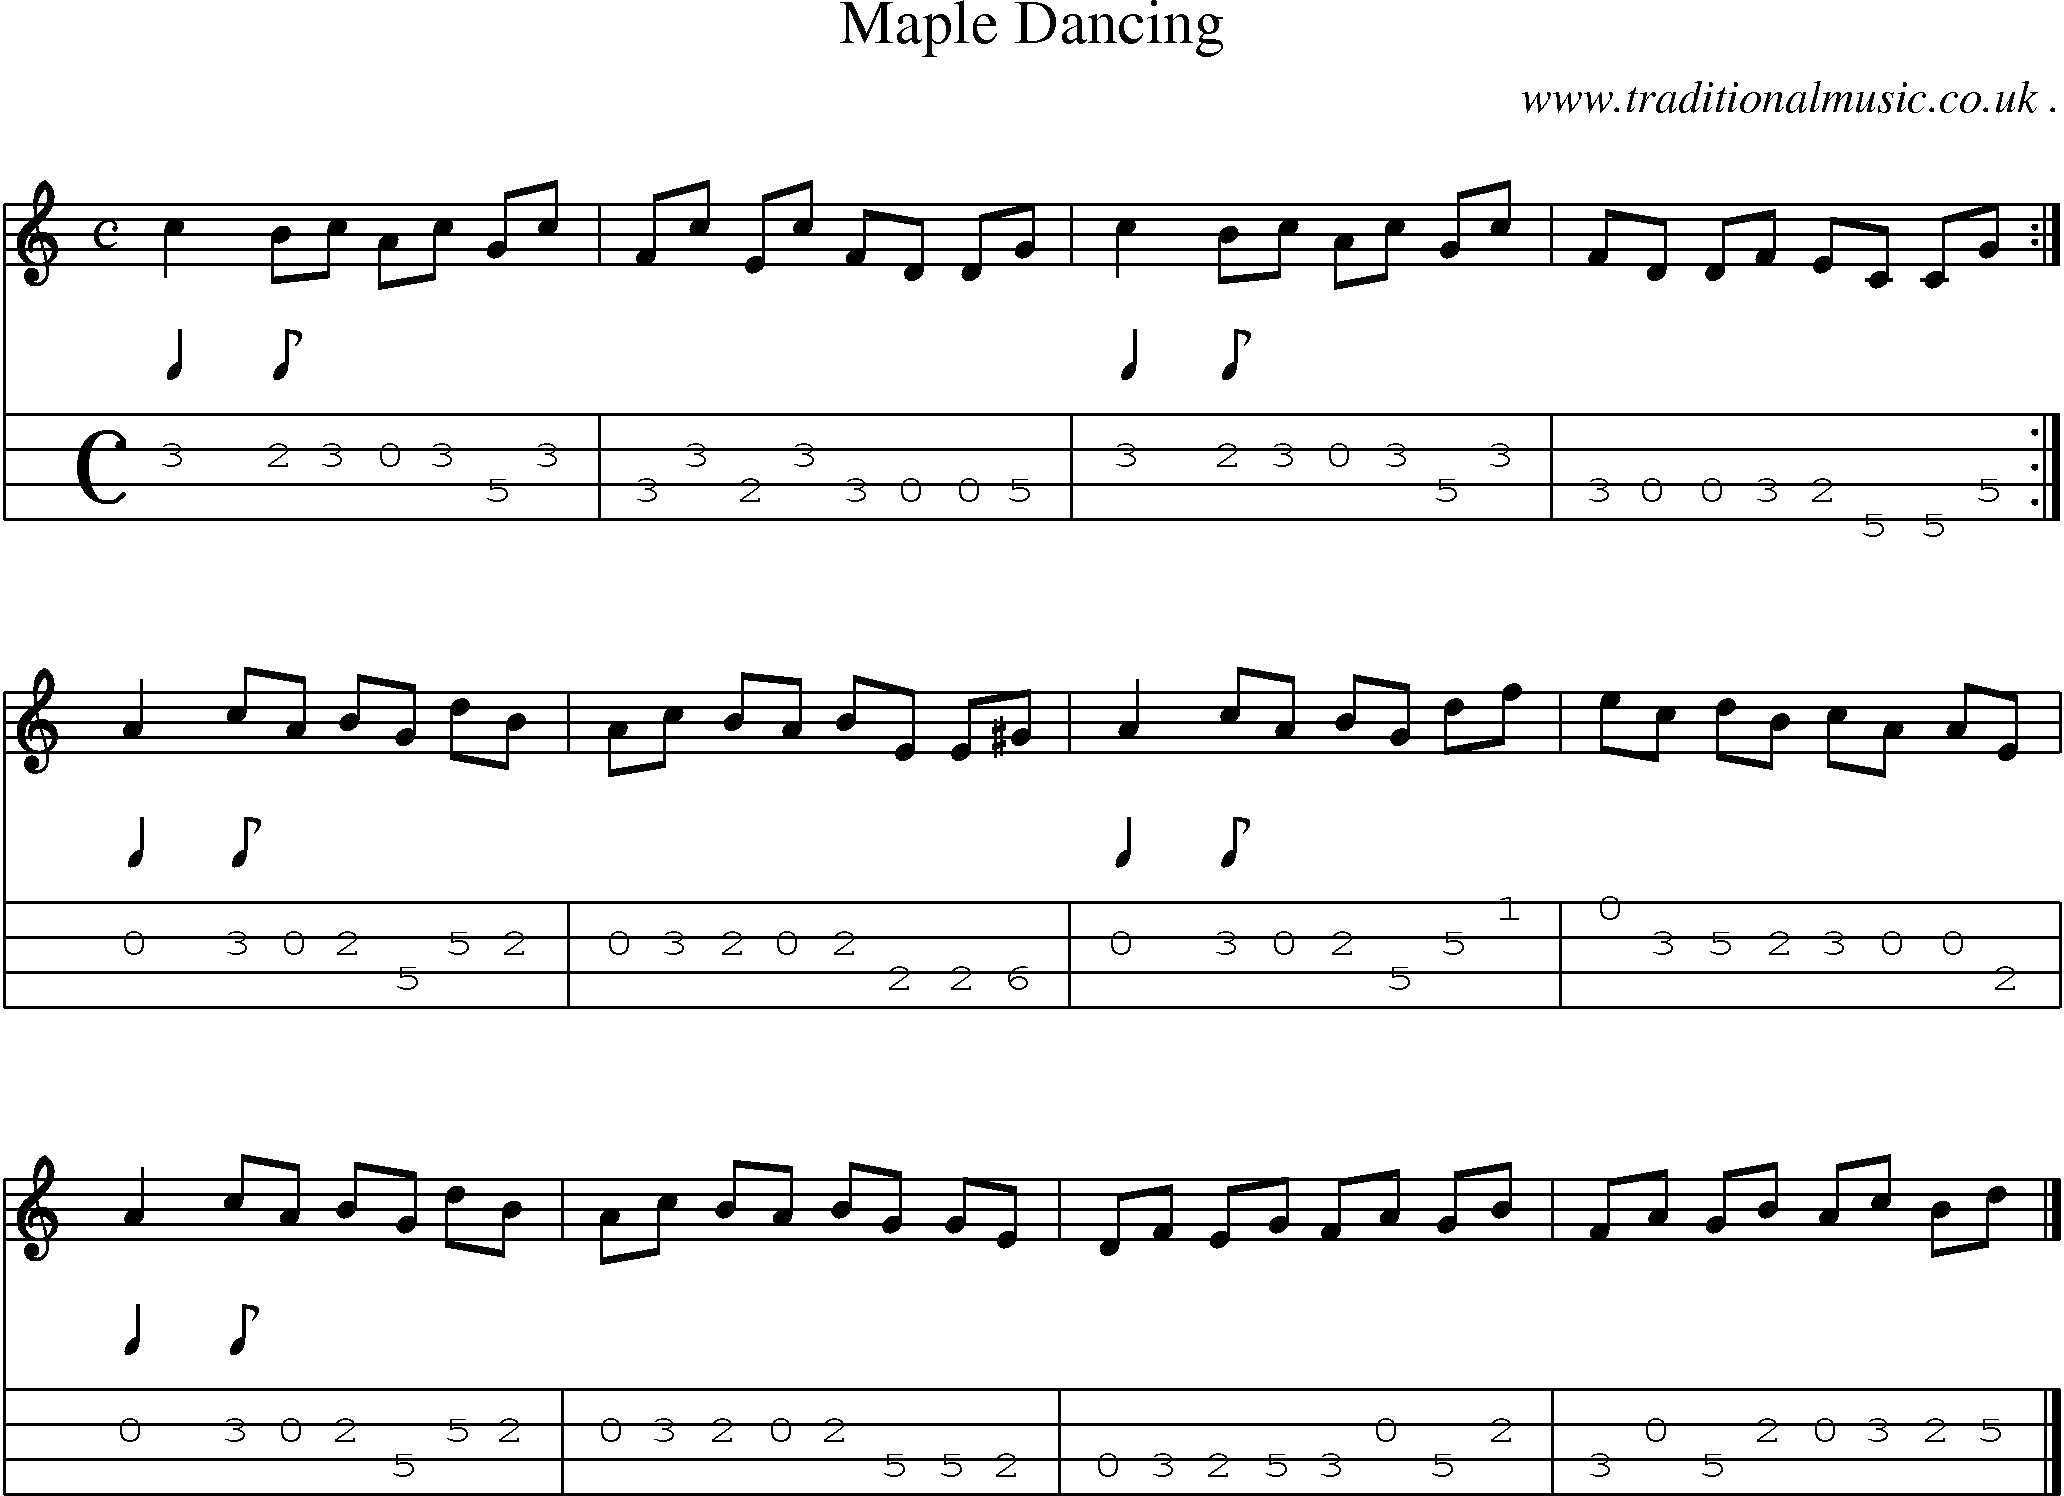 Sheet-music  score, Chords and Mandolin Tabs for Maple Dancing